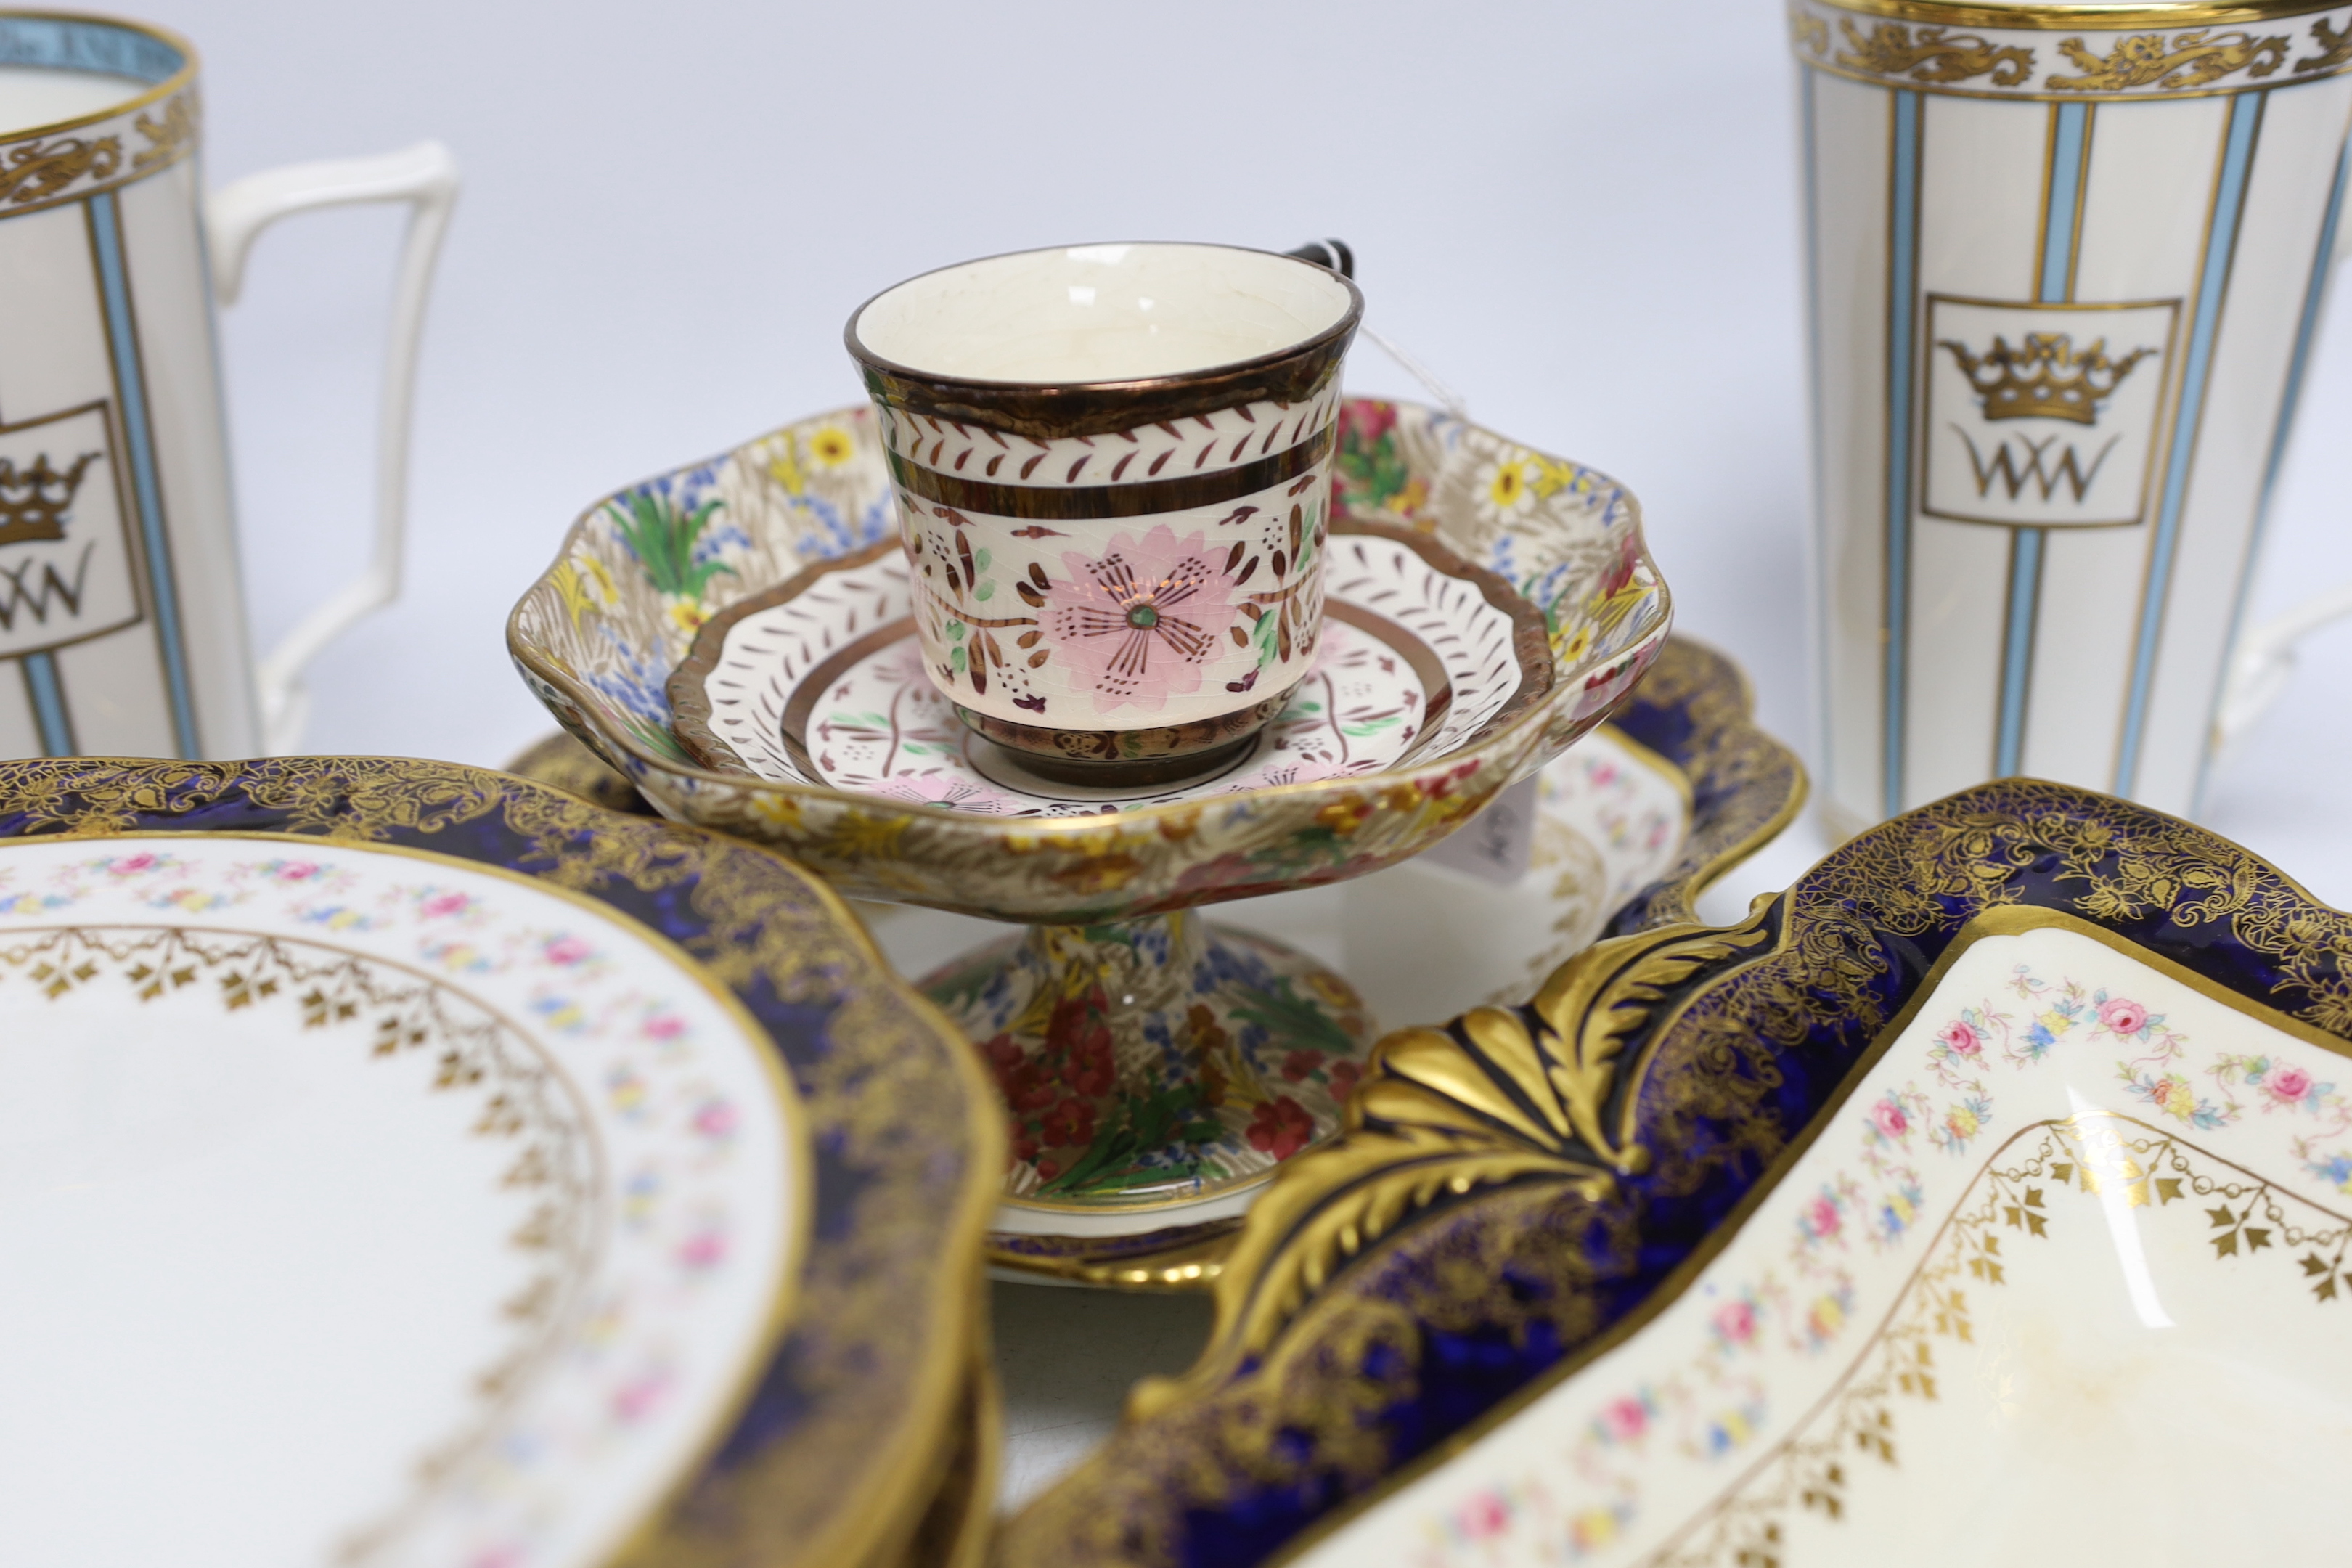 An Aynsleys part dessert service and other tea wares including a pair of commemorative mugs